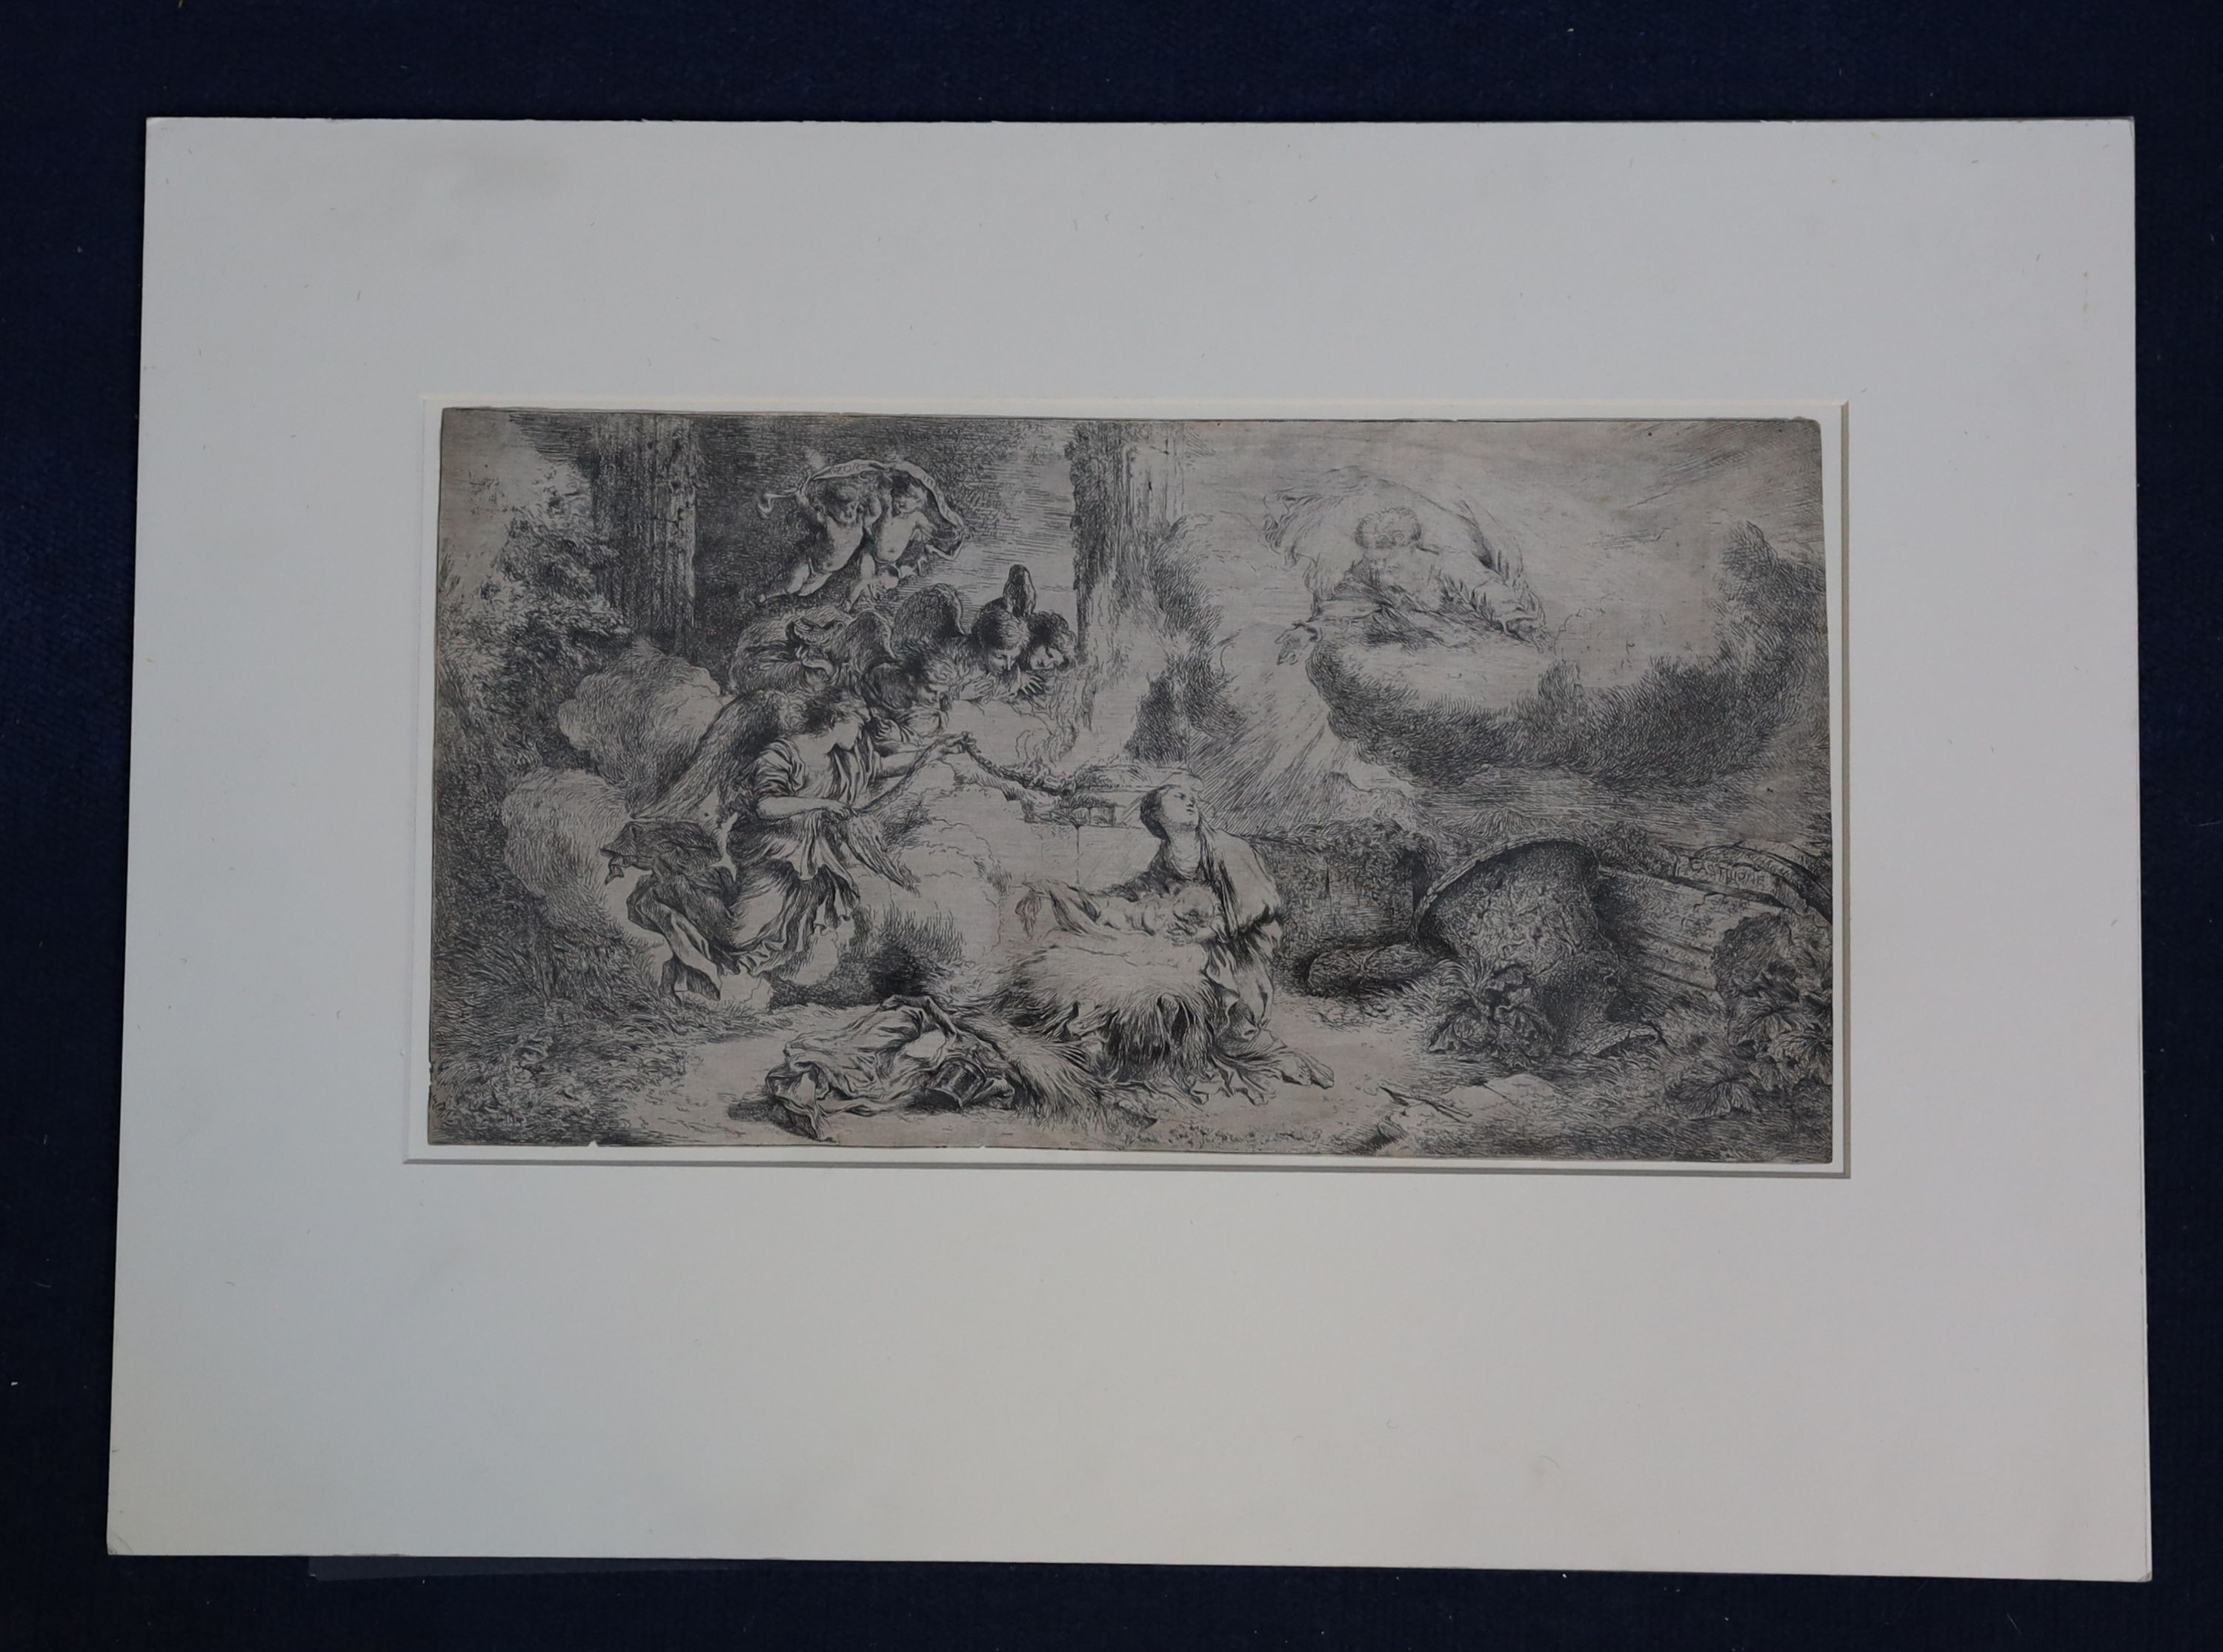 Giovanni Benedetto Castiglione (1609-1664), The Nativity with God the Father and Angels, c.1647, etching, 20 x 38cm. unframed